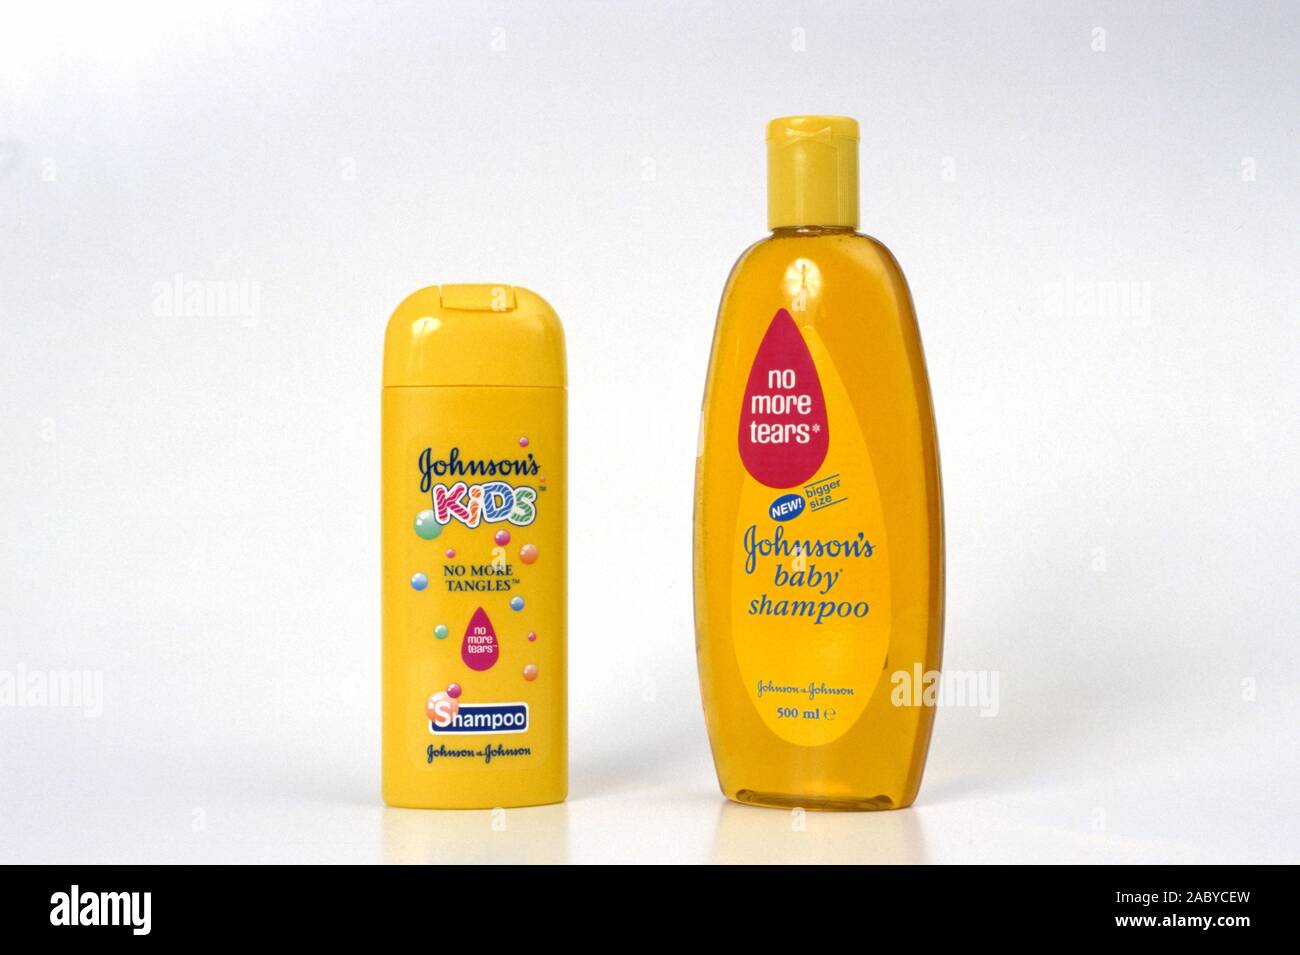 Johnson S Baby Shampoo High Resolution Stock Photography And Images Alamy